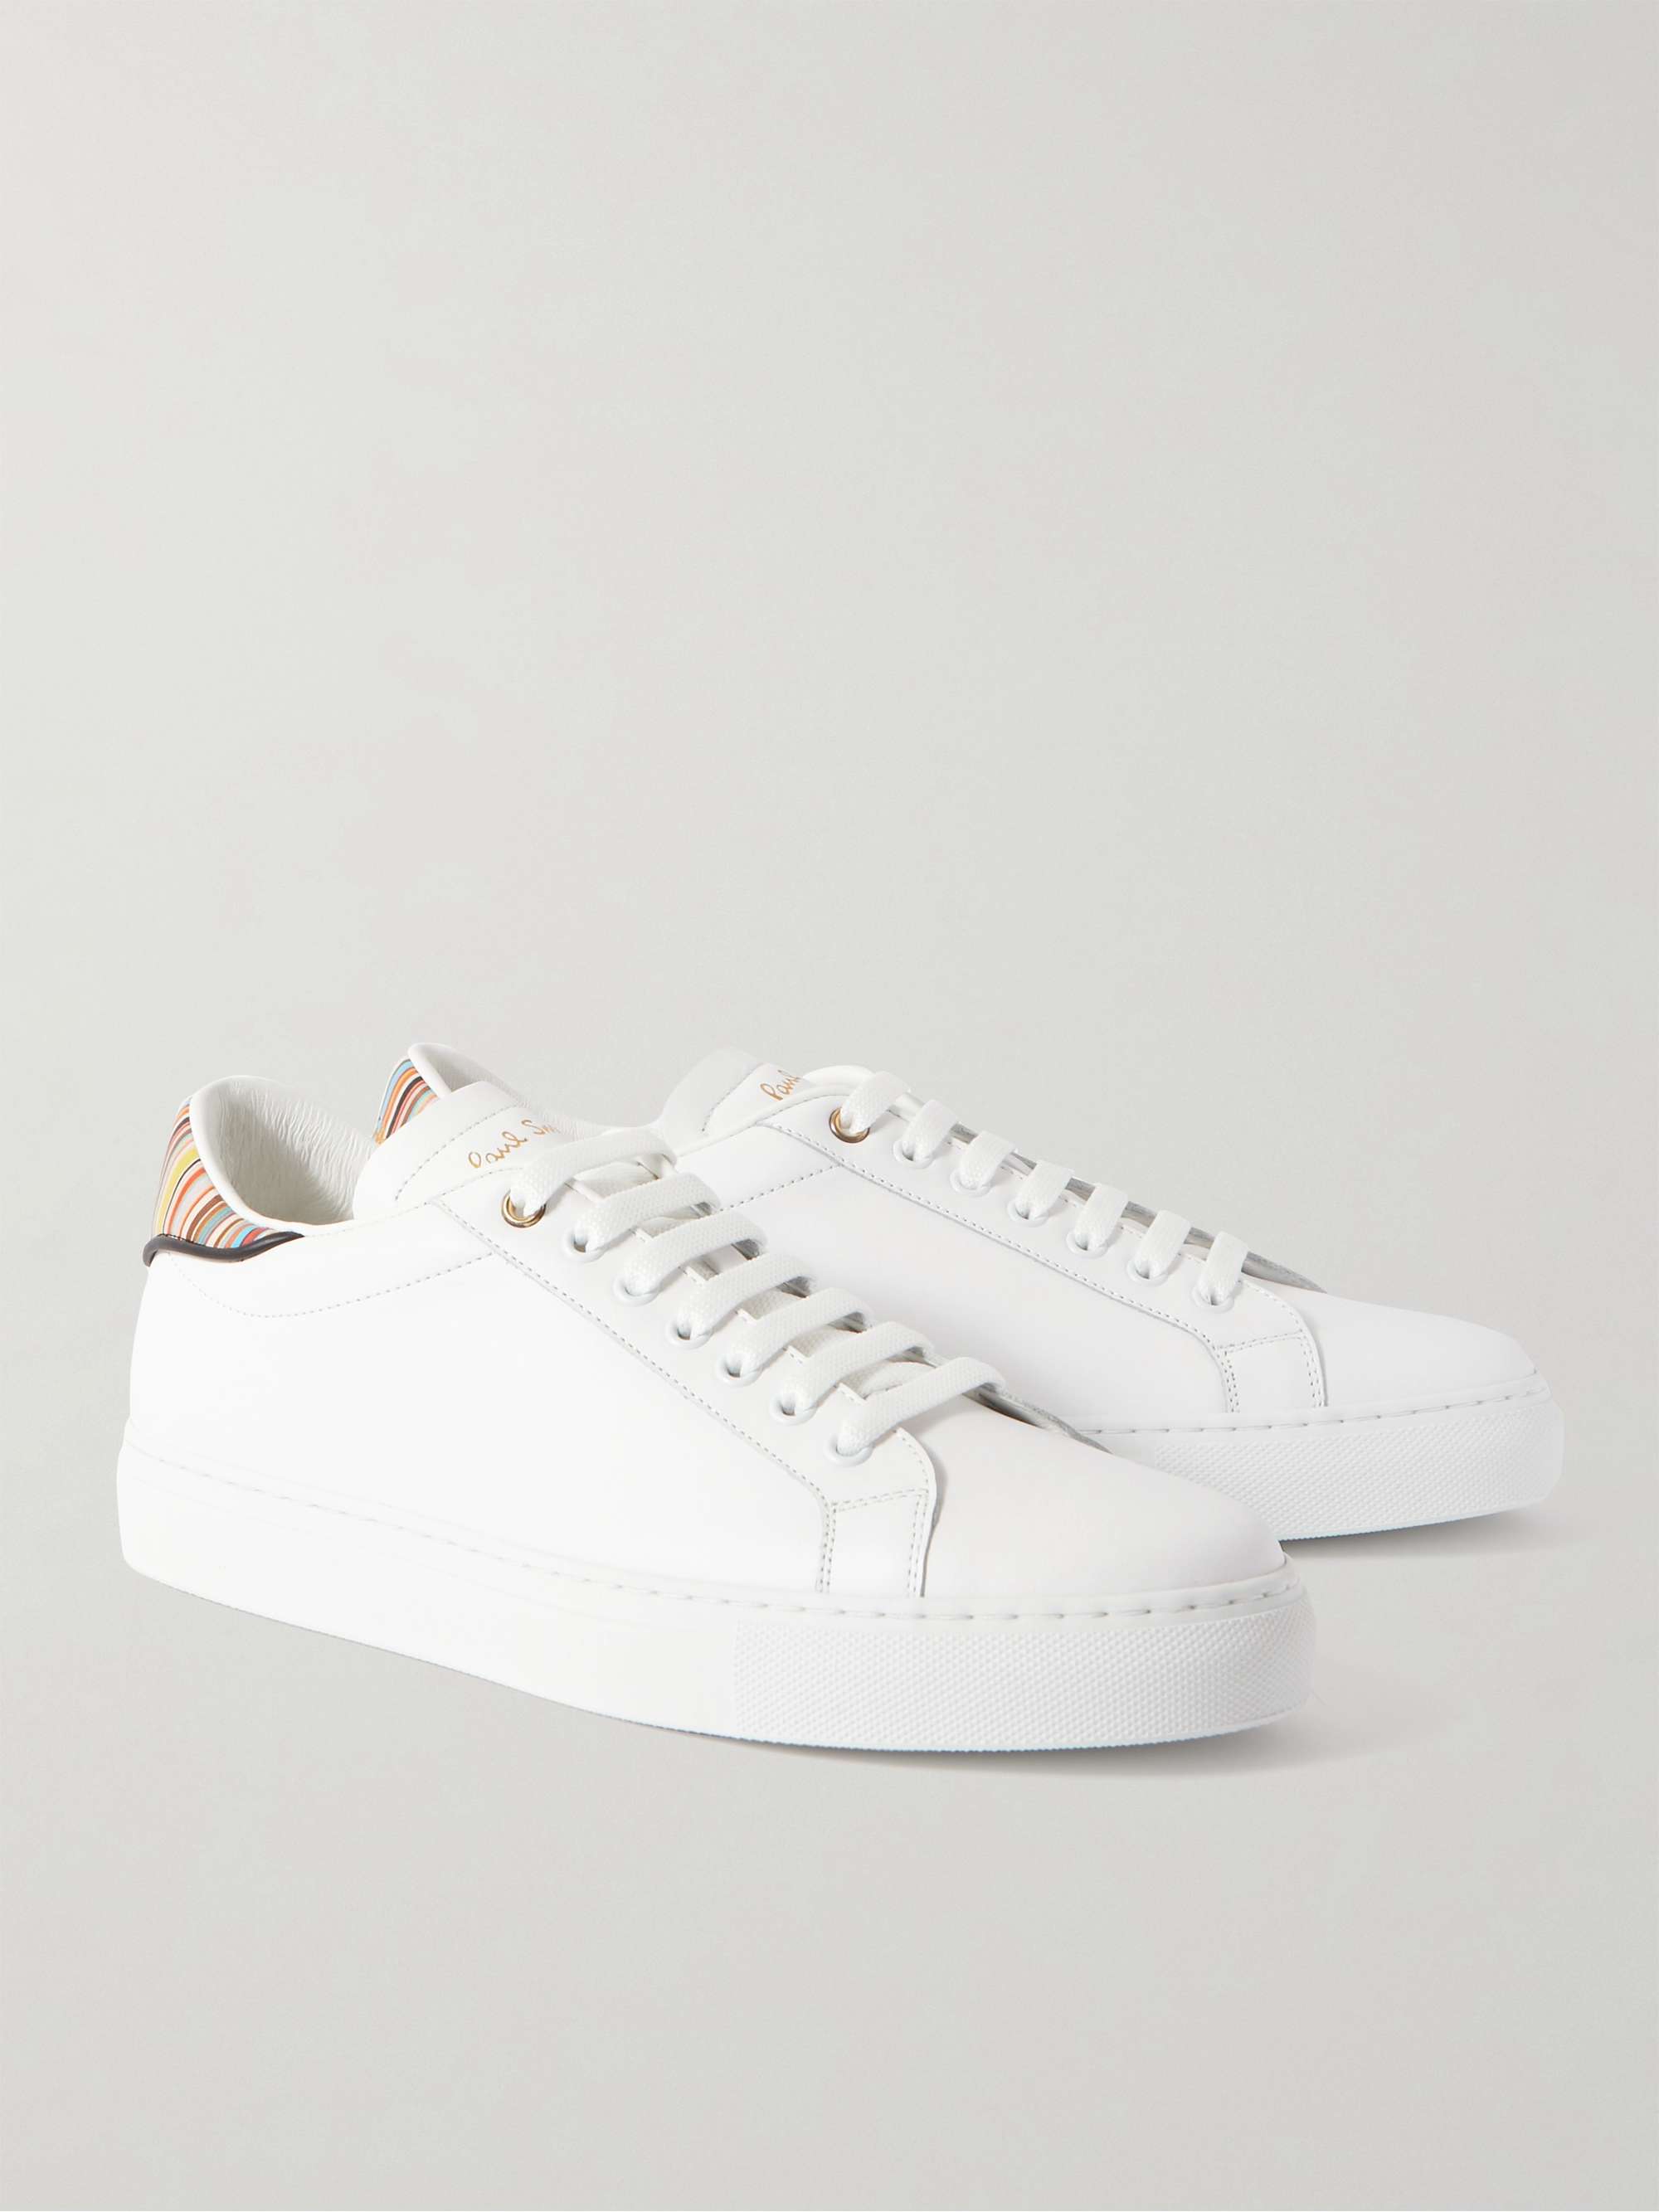 PAUL SMITH Beck Artist Stripe Leather Sneakers